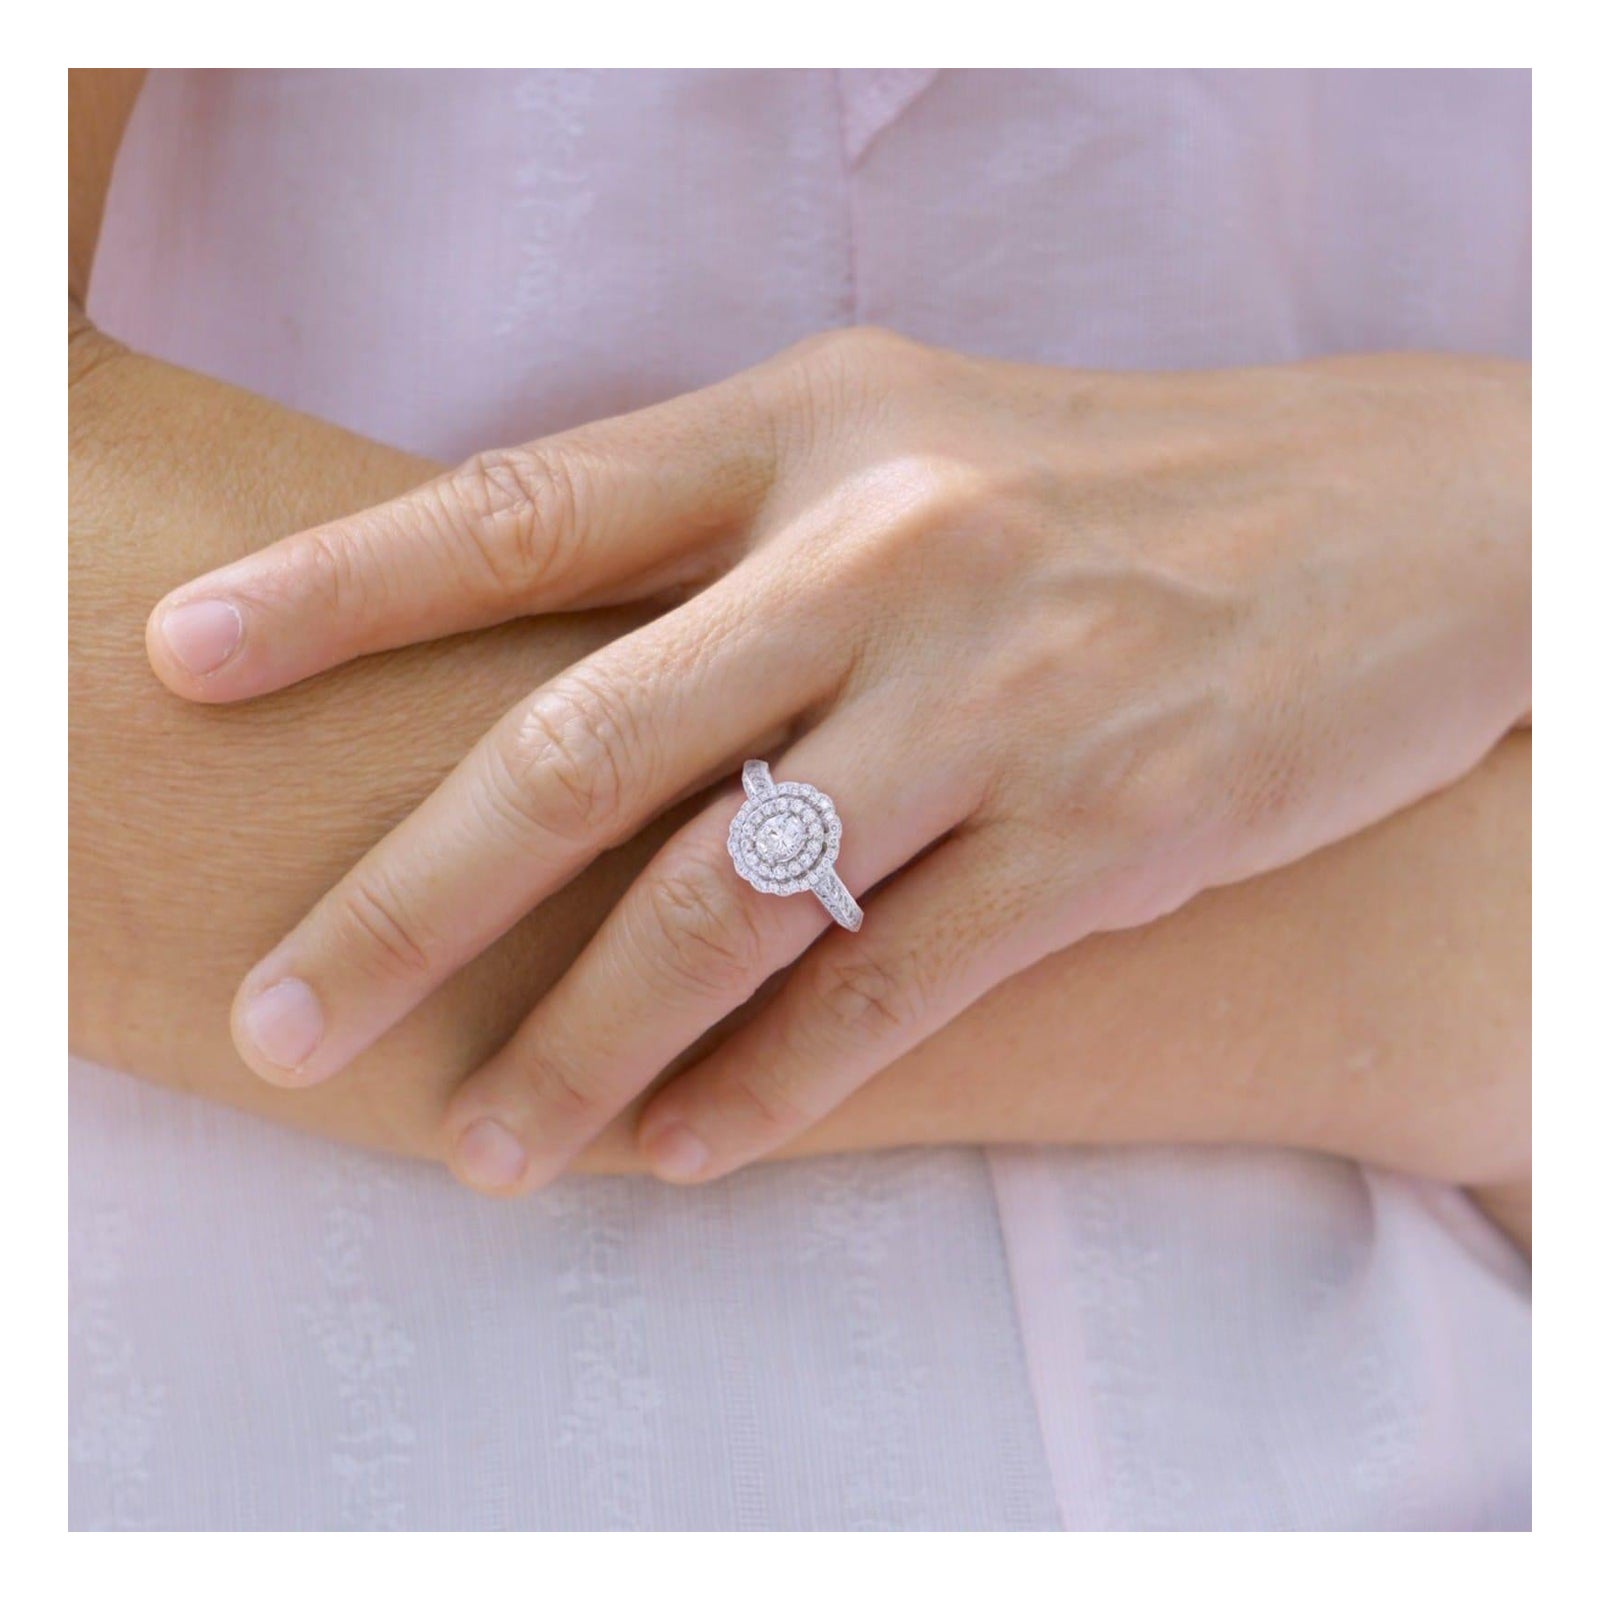 White oval shape ring